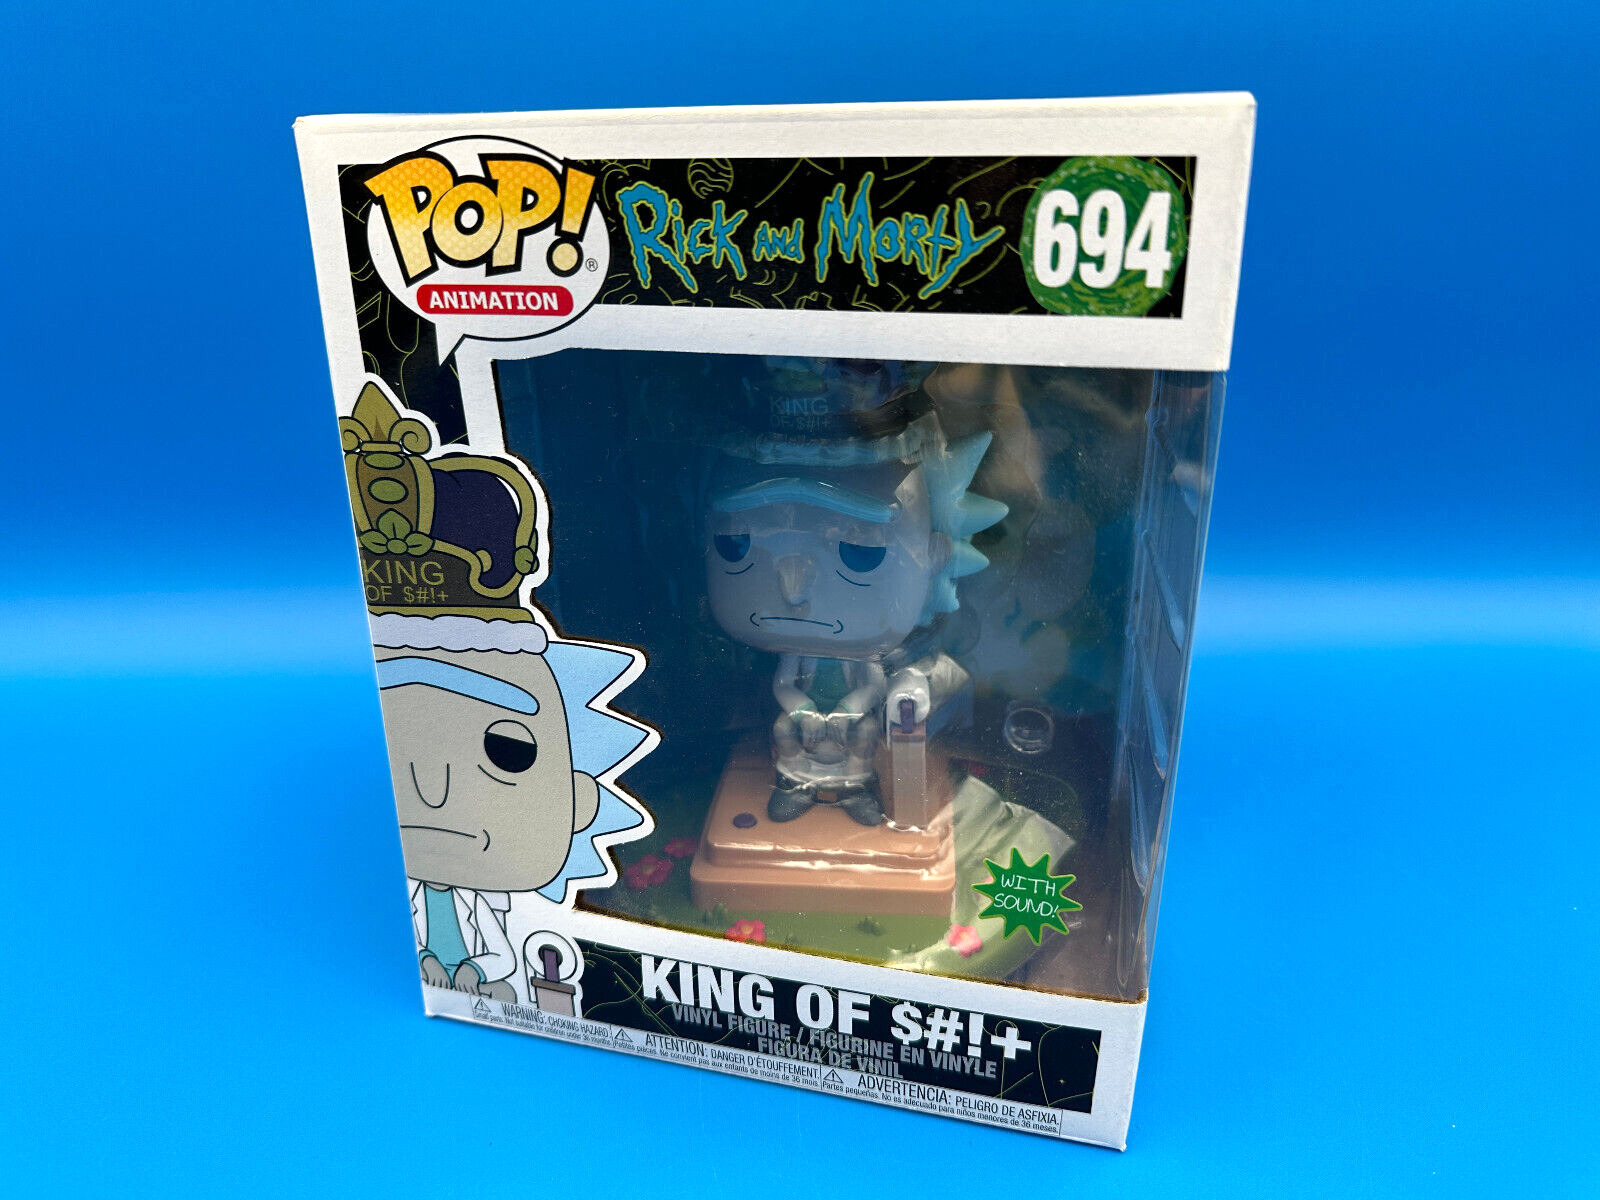 FUNKO POP DELUXE ANIMATION RICK AND & MORTY KING OF S#+ VINYL FIGURE 694 #694